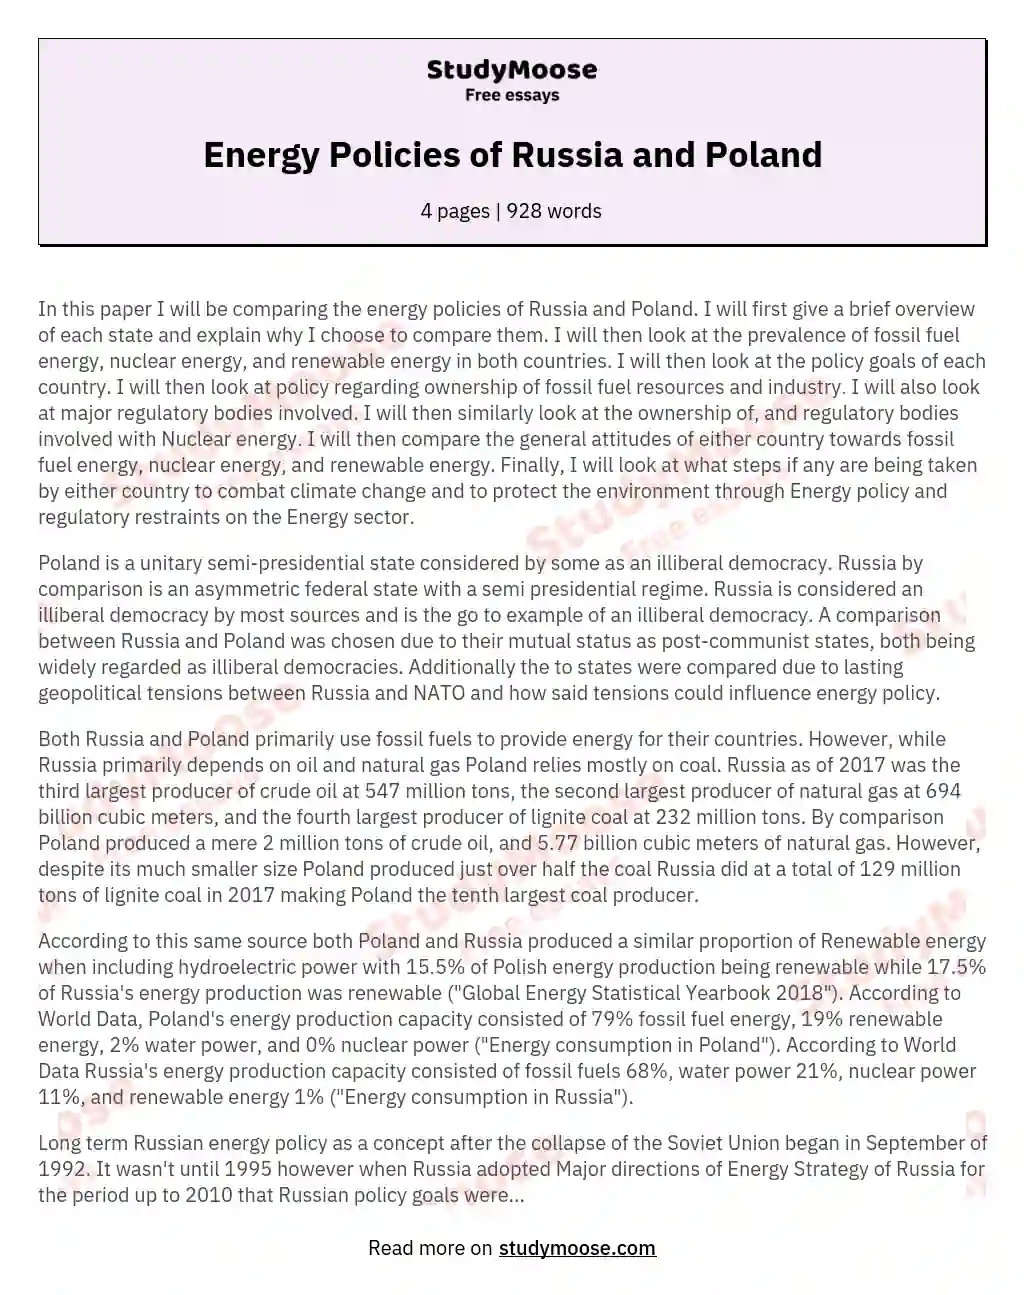 Energy Policies of Russia and Poland essay